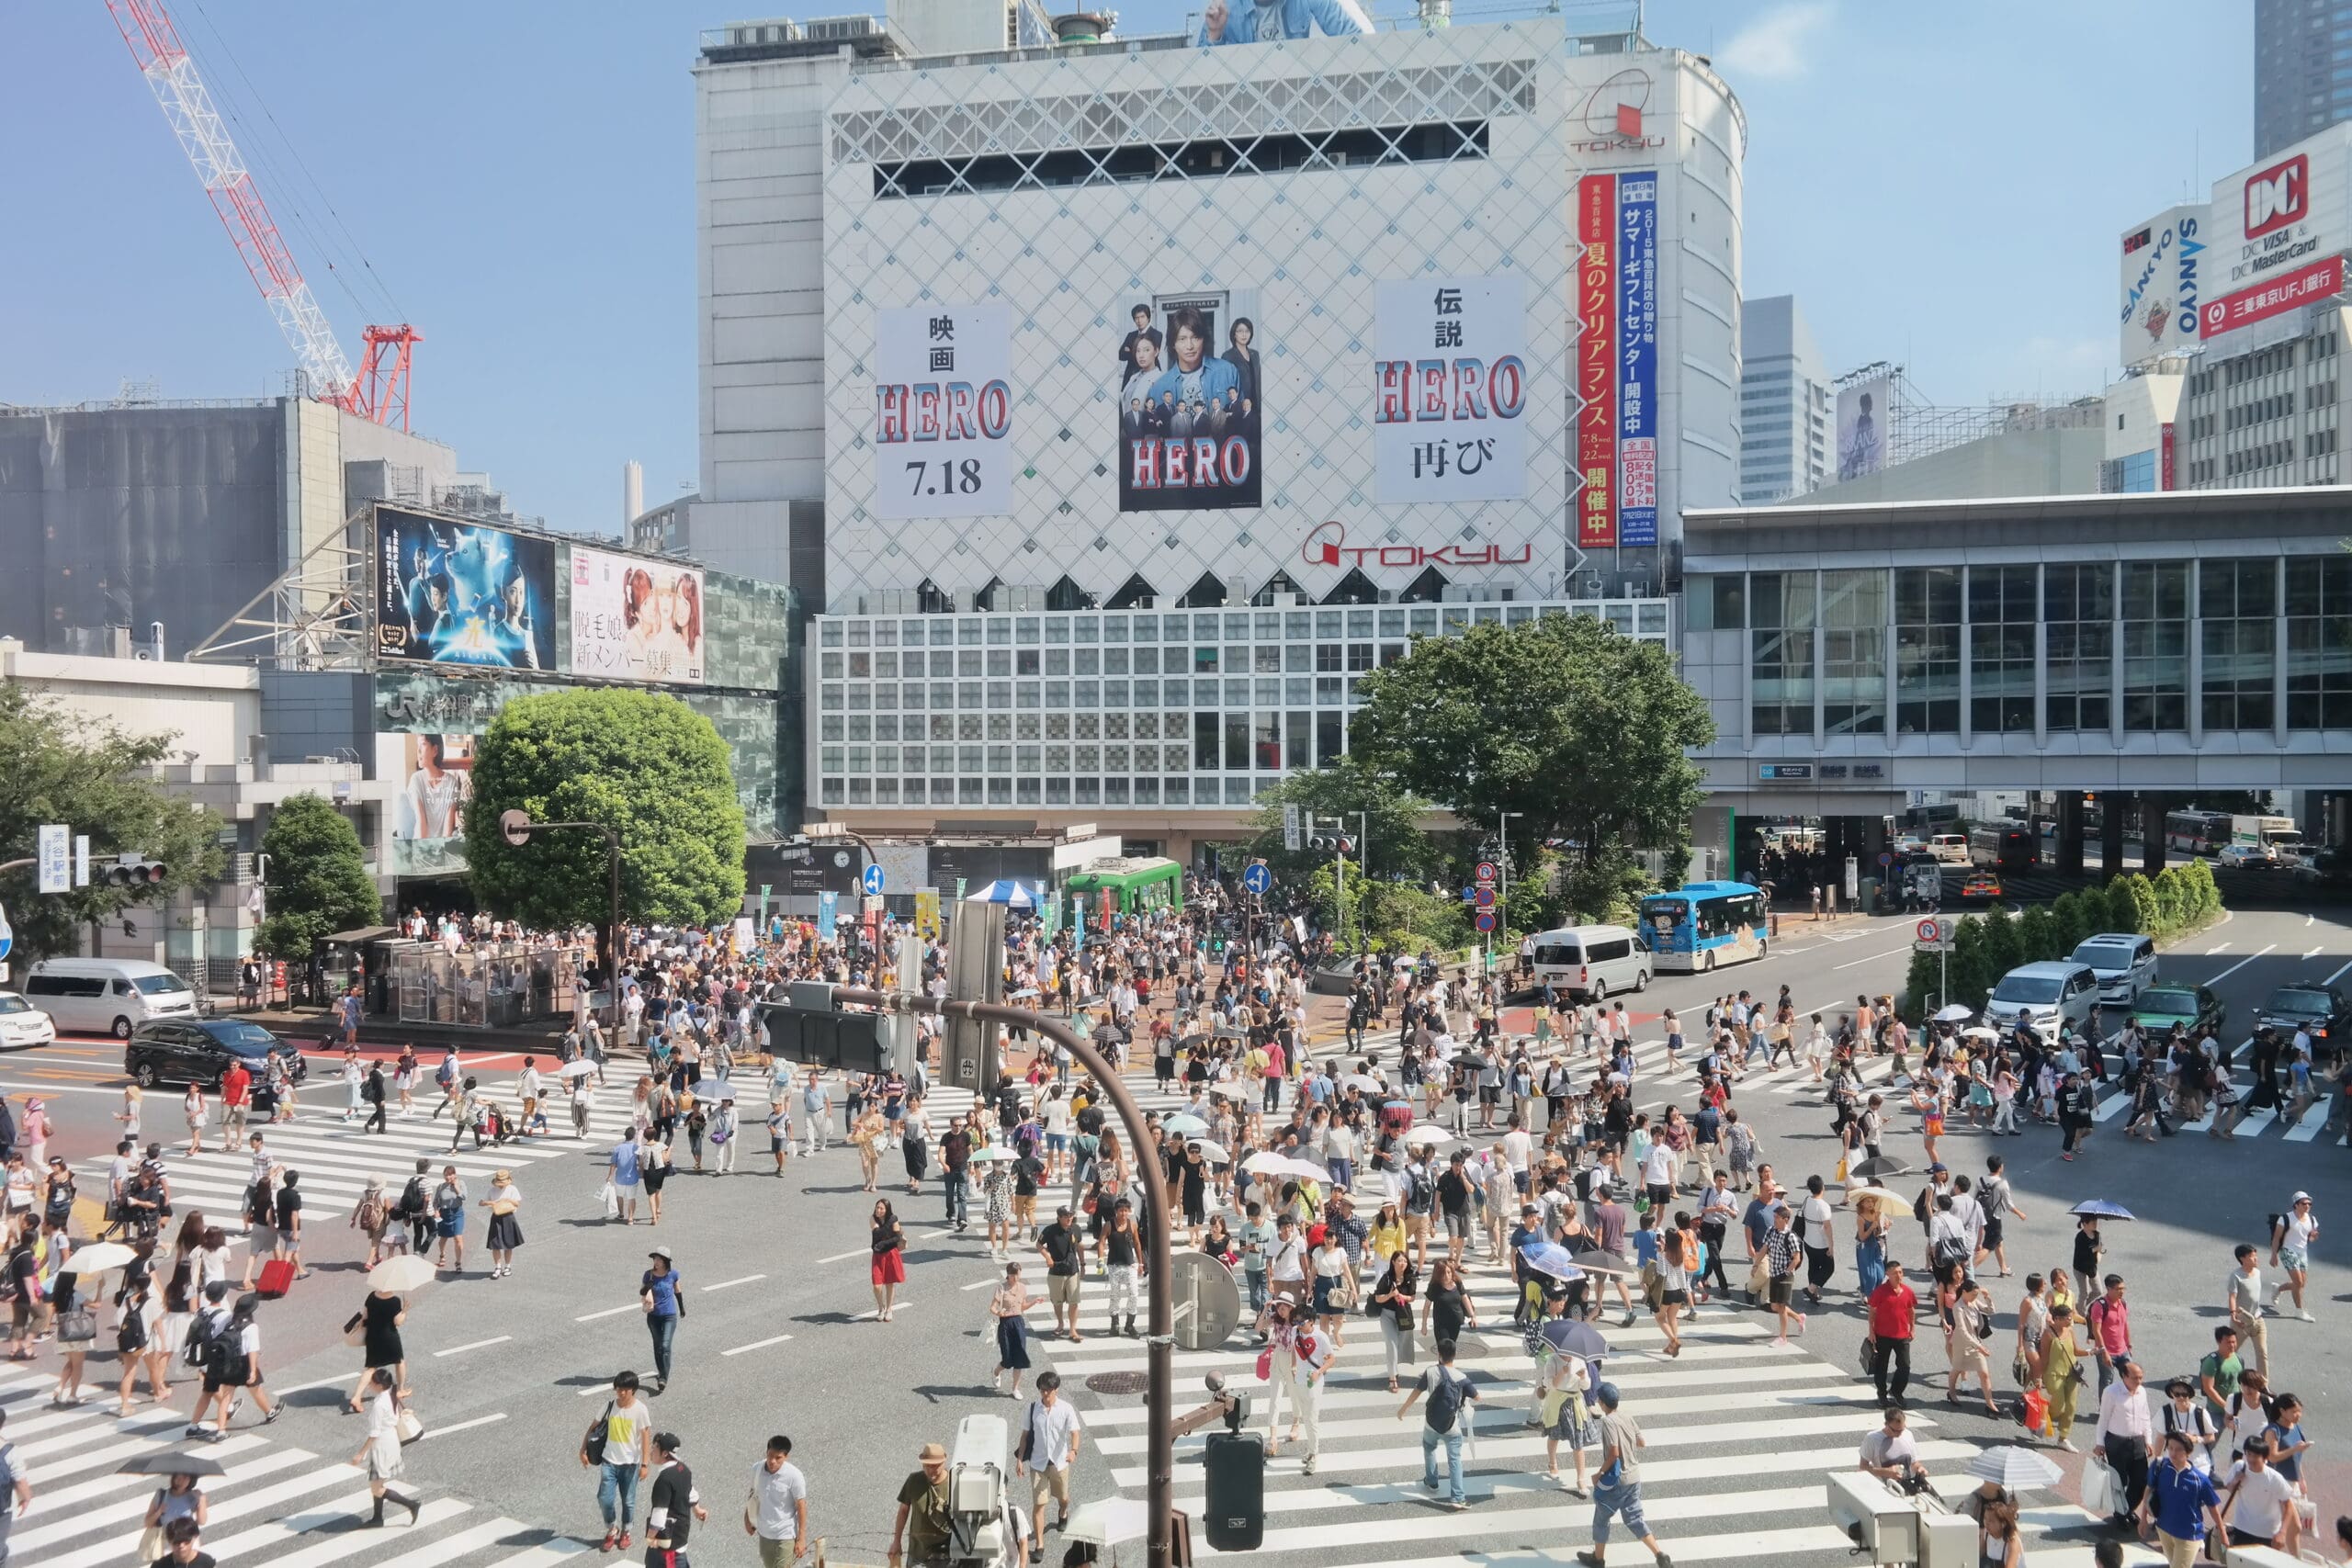 Shibuya Crossing in Tokyo With Thousands Strangers